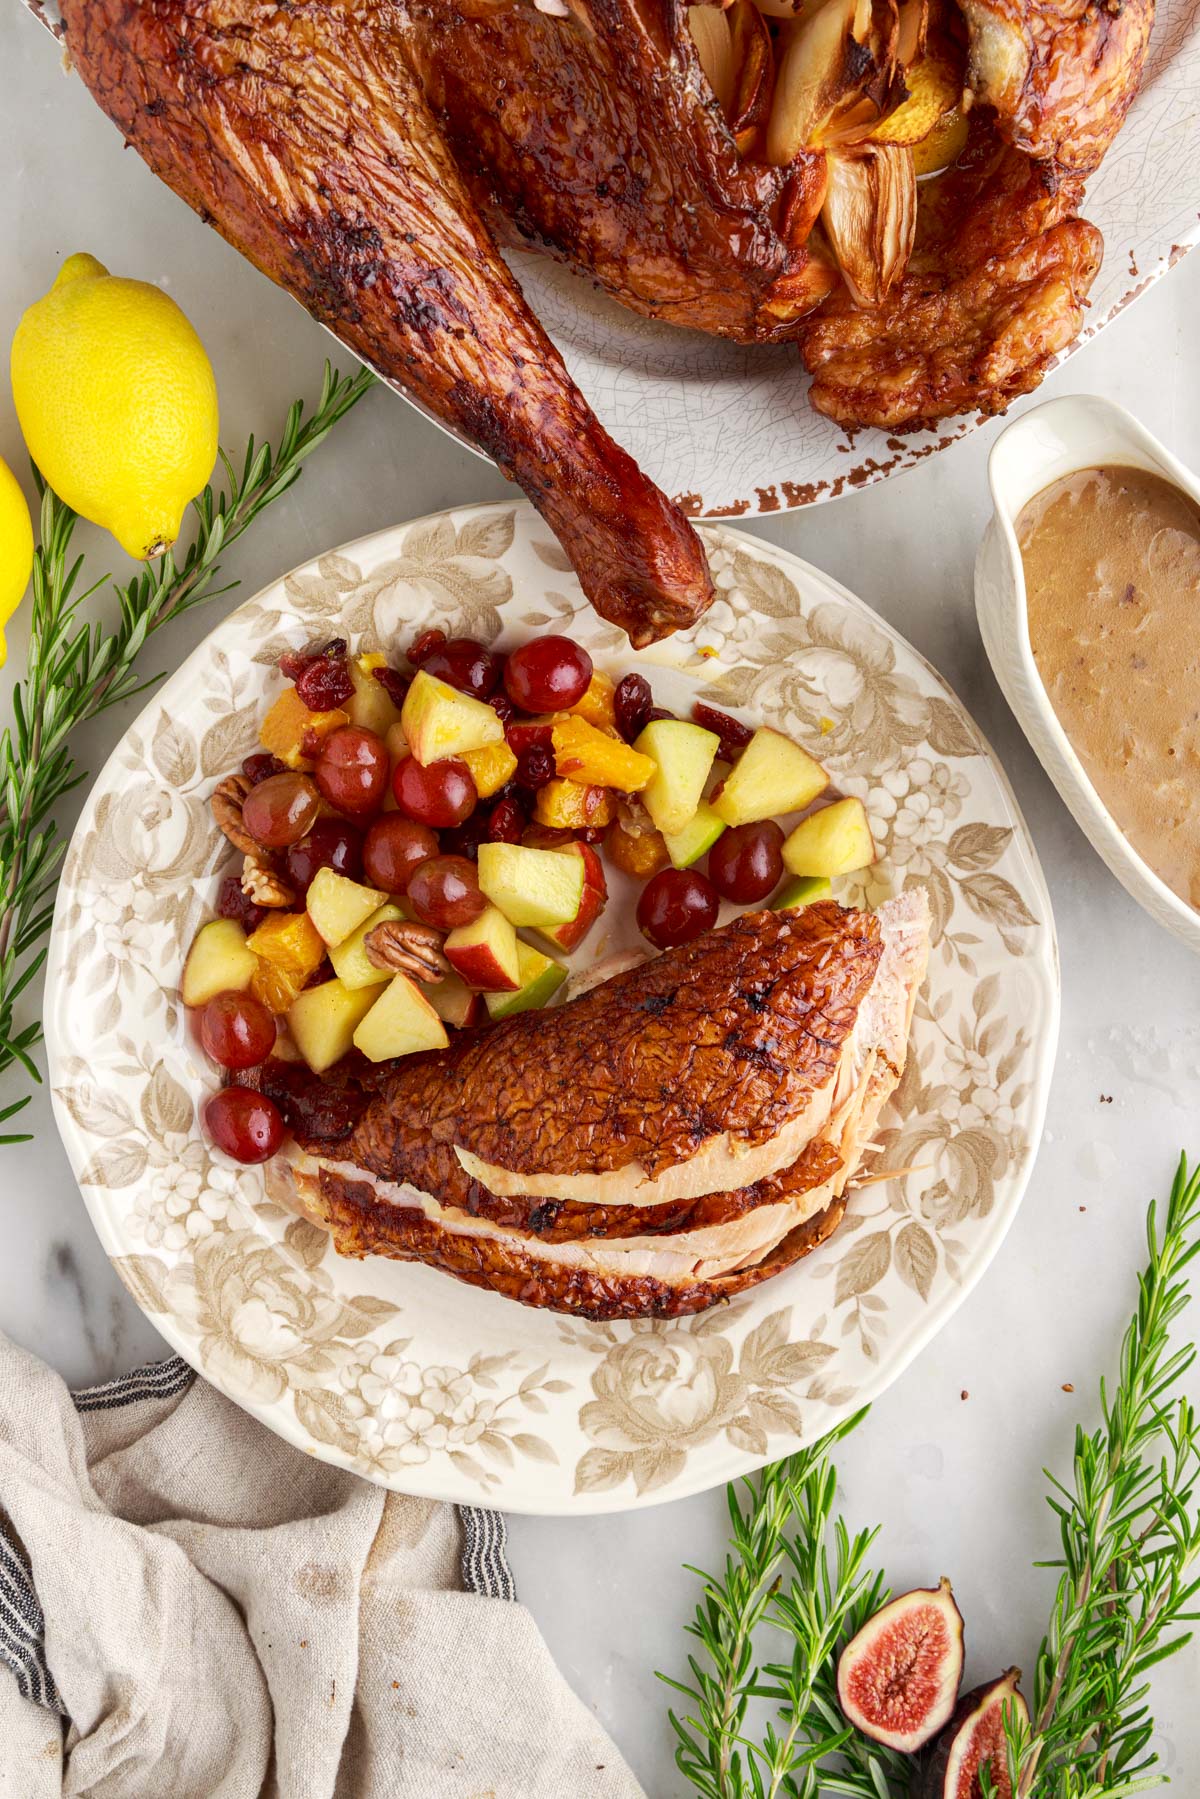 slices of the browned smoked turkey on a plate with a large side of mixed fruit next to gravy and bottom of turkey